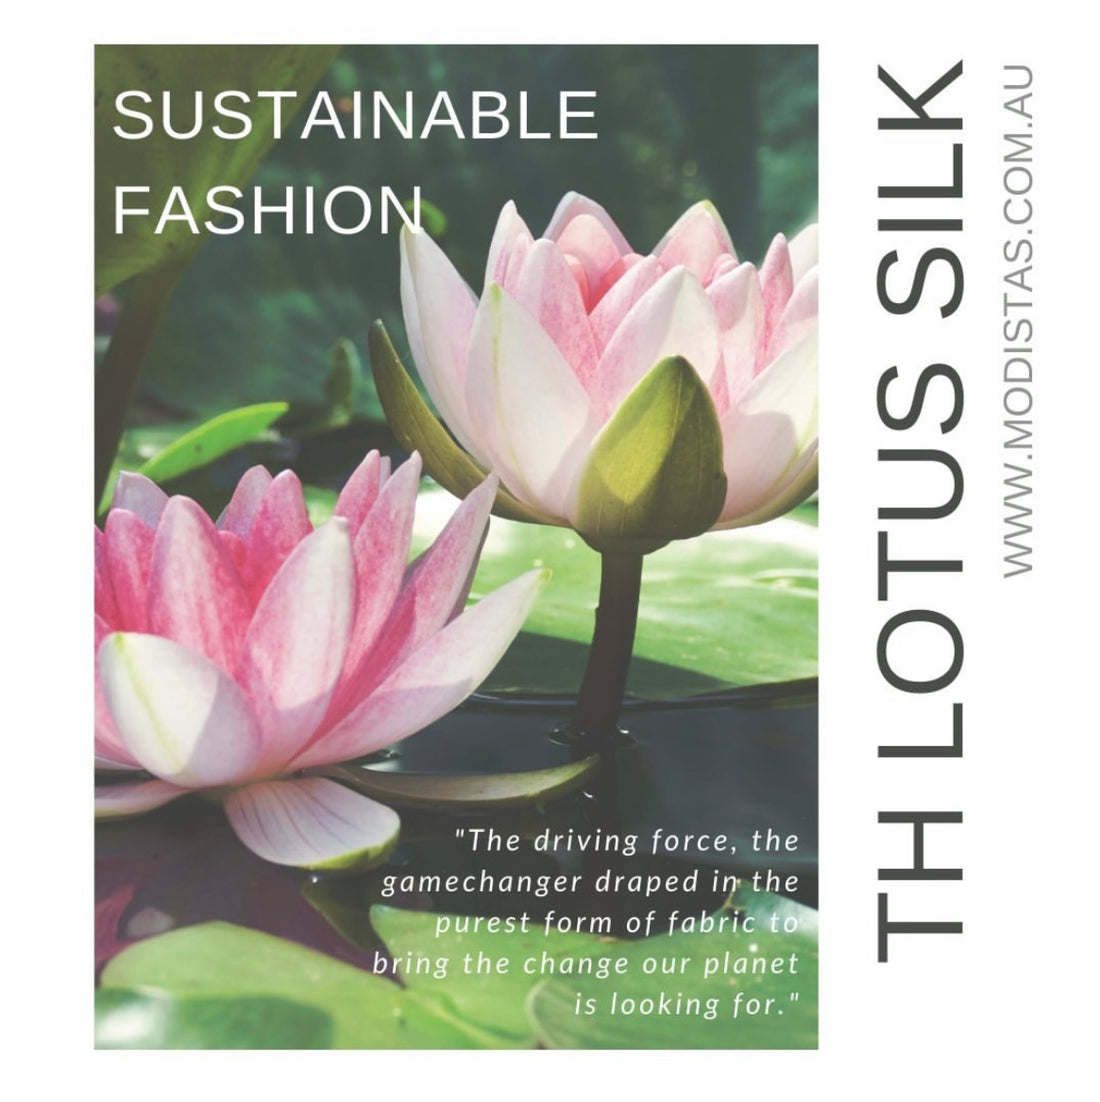 Sustainable fashion - Why to go for it?